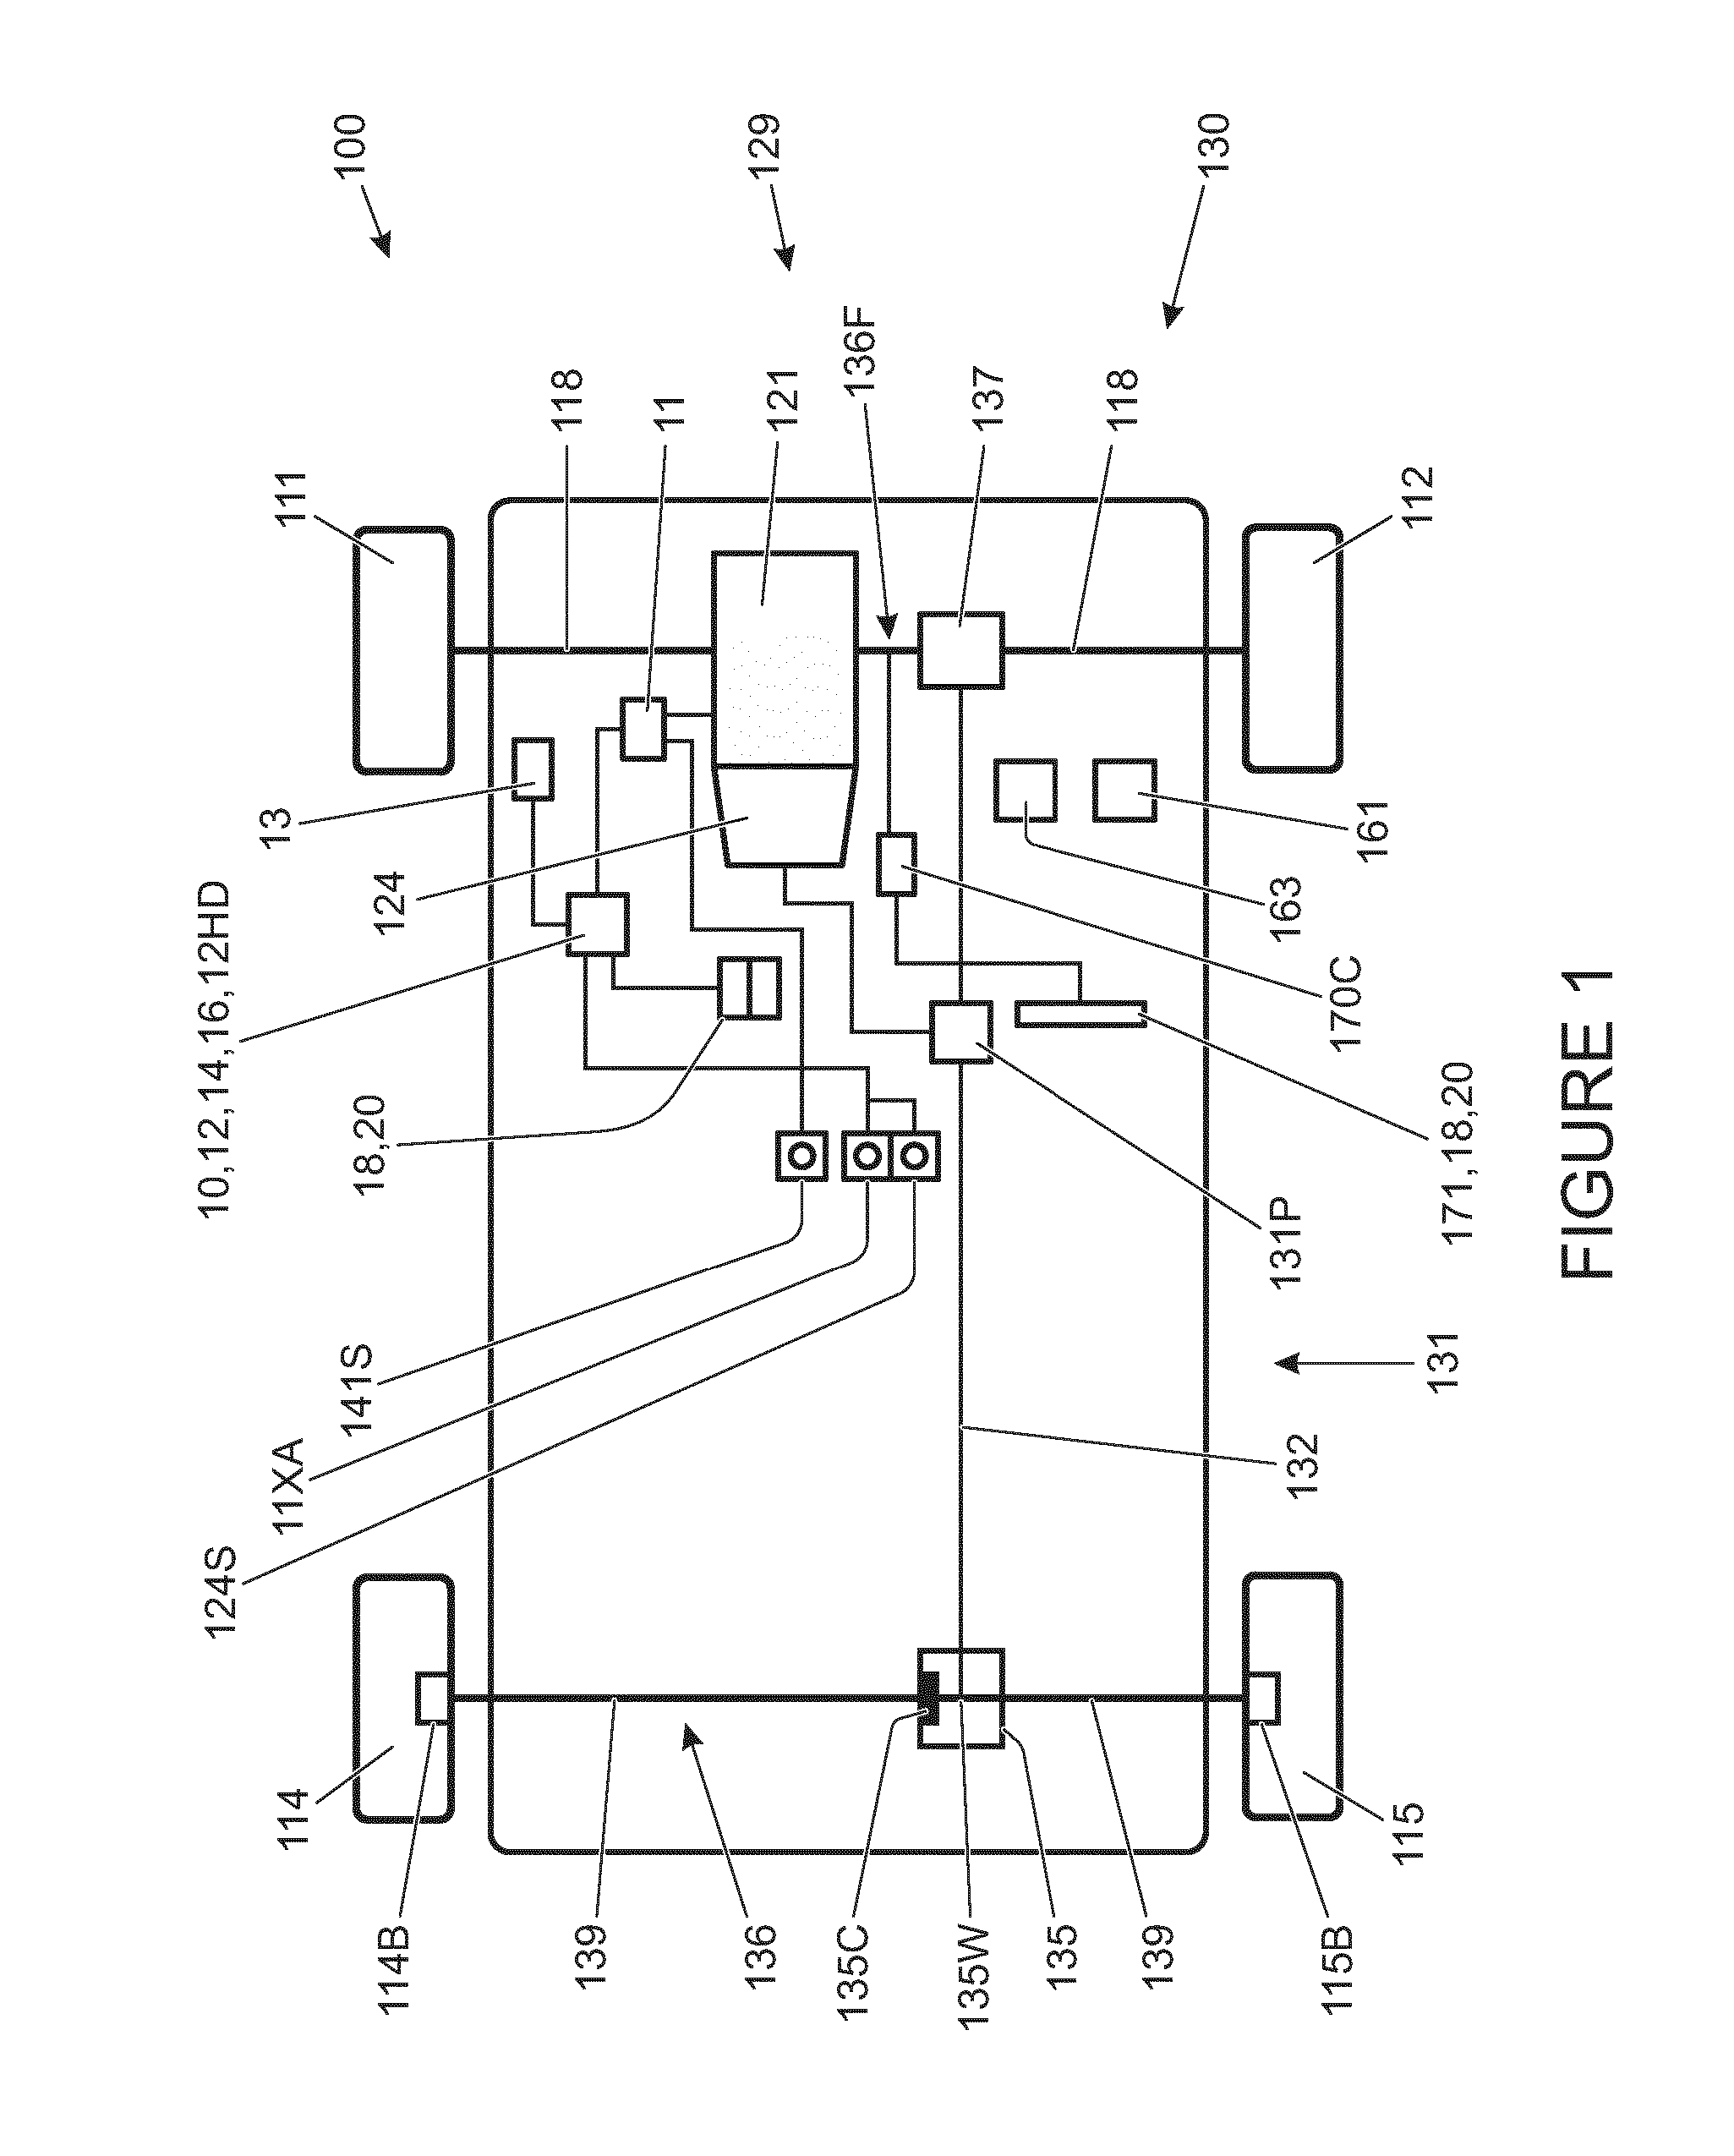 Vehicle speed control system and method